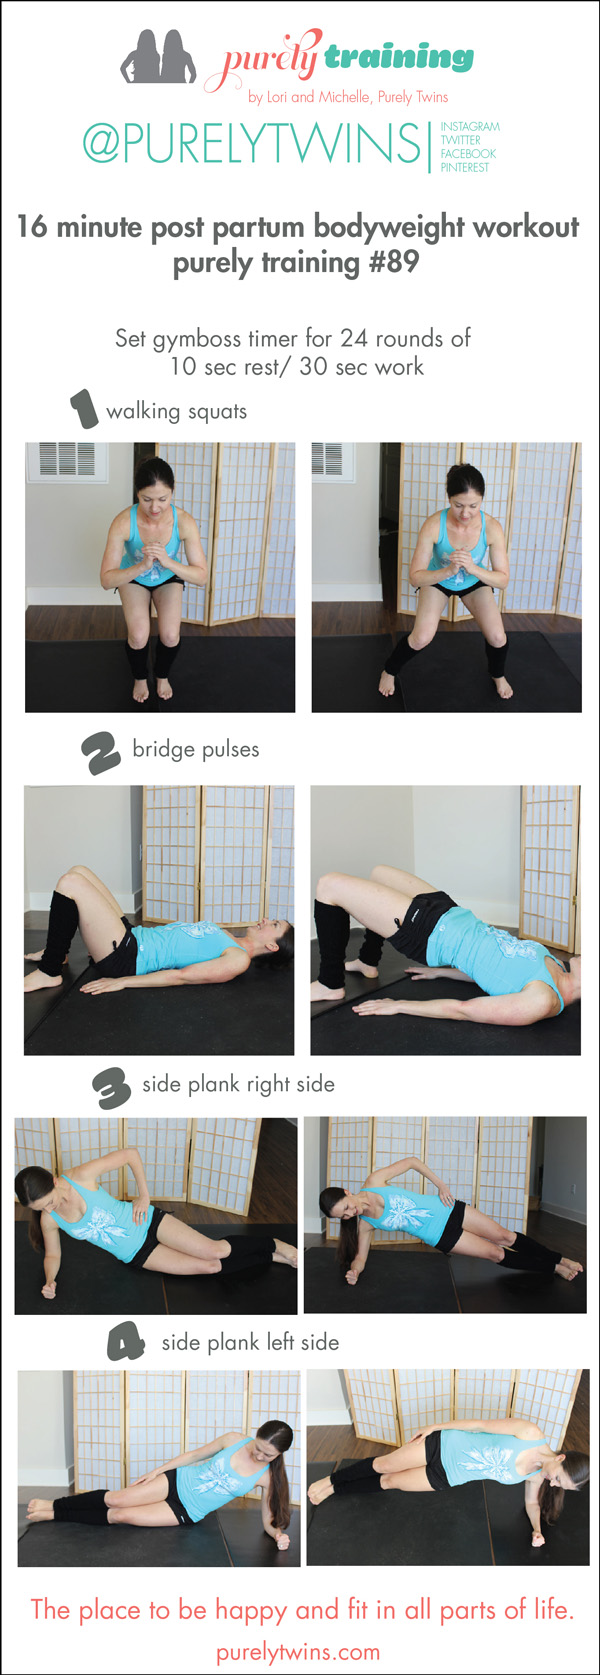 16 minute bodyweight post partum diastasis safe home interval workout purely training 89 with the purely twins